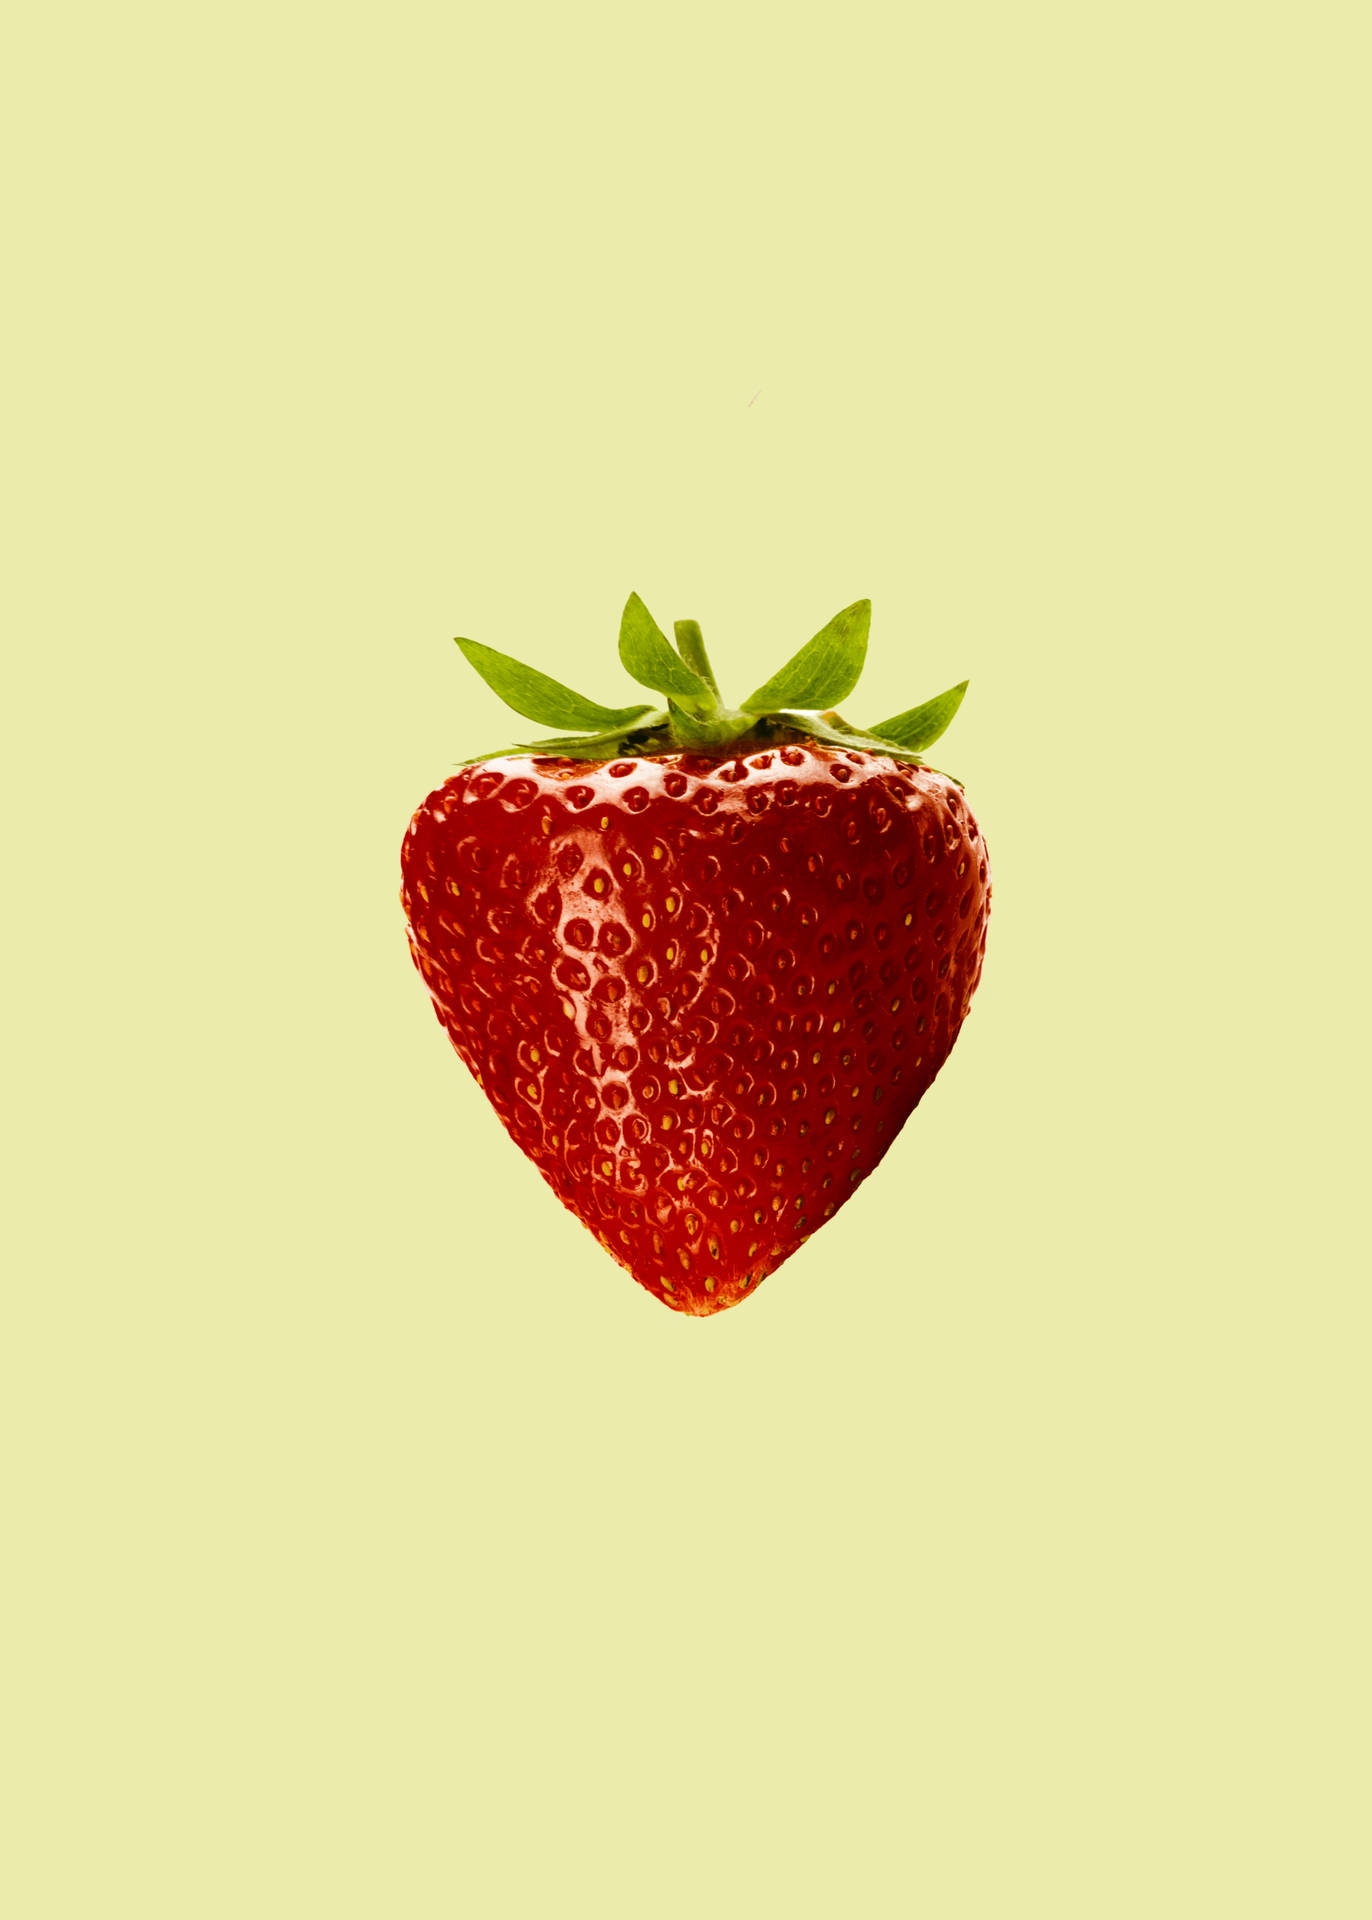 Strawberry 7173X10041 Wallpaper and Background Image